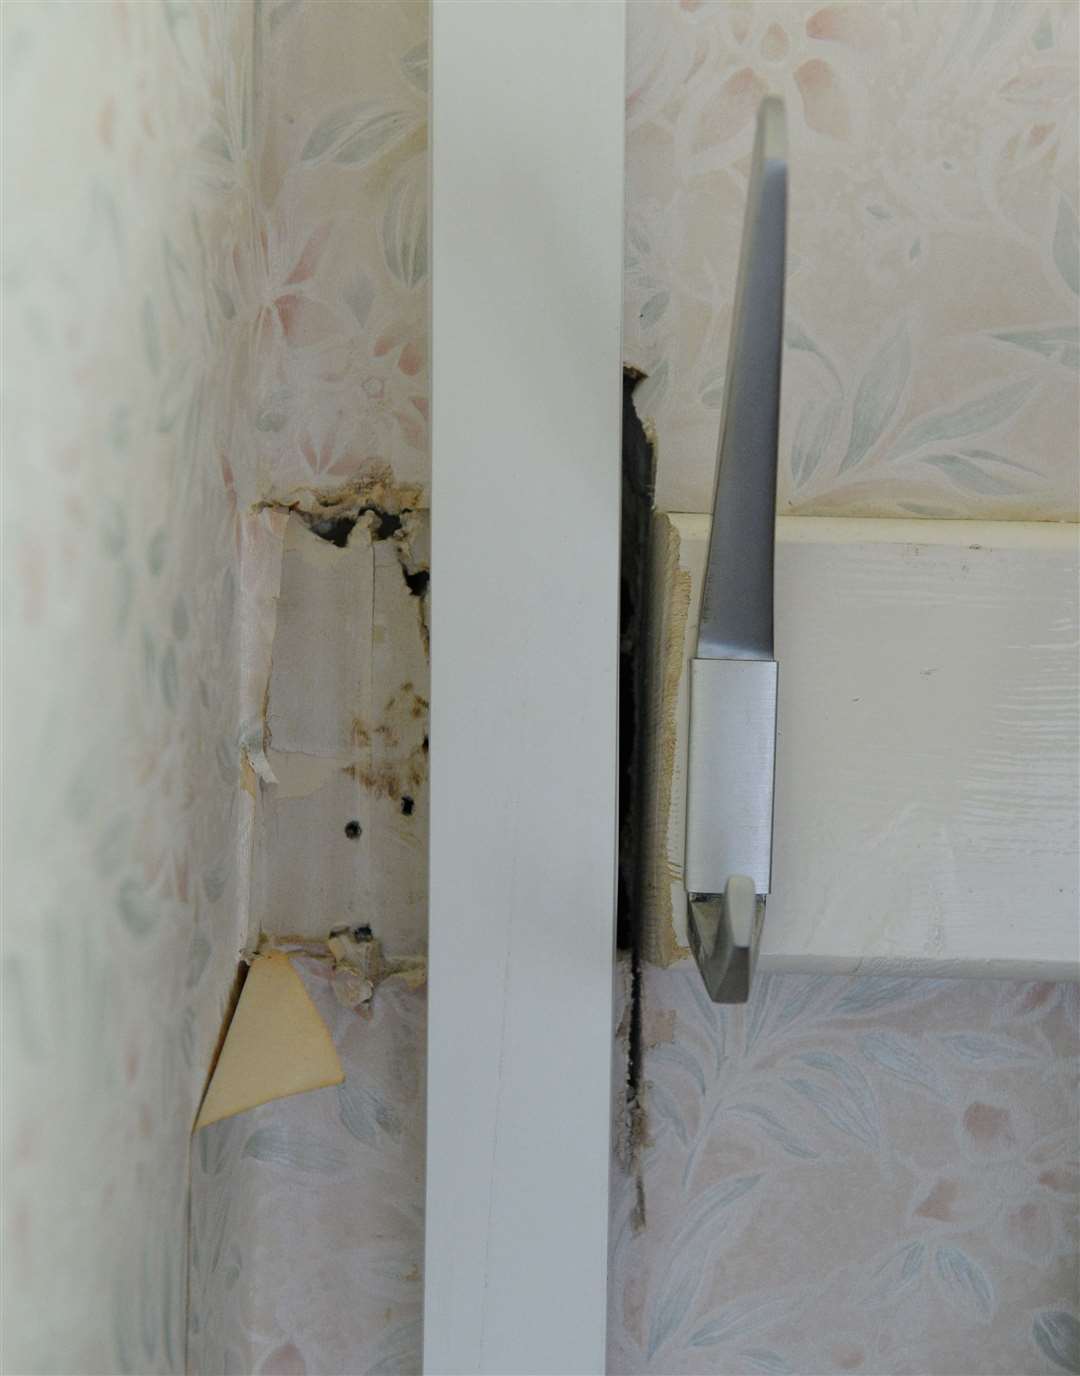 John Ballie is unhappy with damge after fitting of new heating system.Holes cut into hall wall.Picture Gary Anthony.